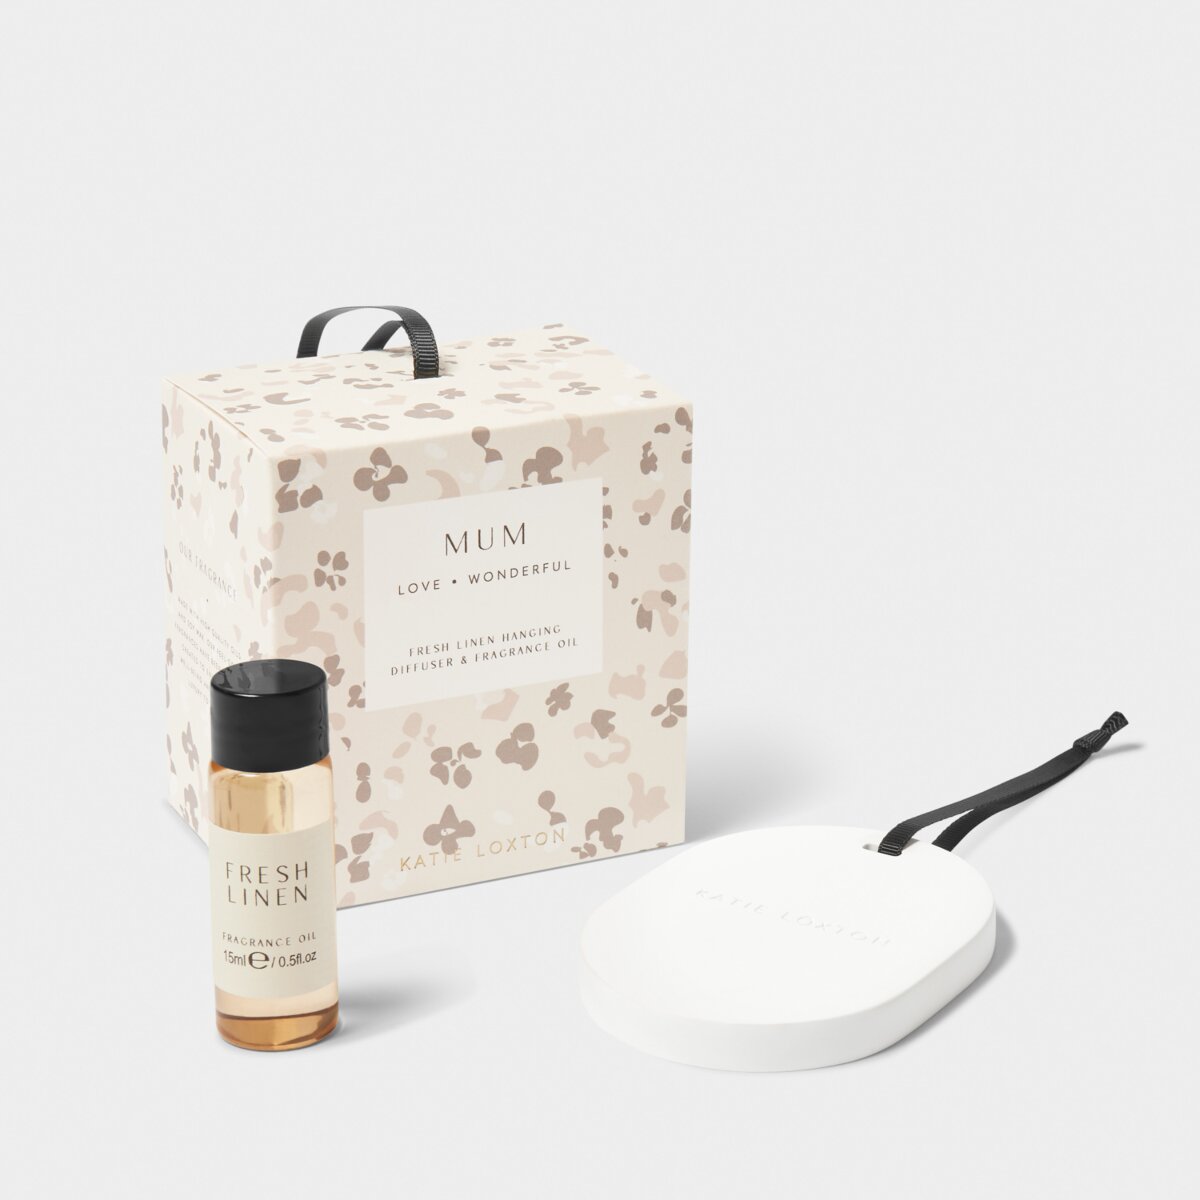 floral box saying 'Mum', Fresh Linen scented diffuser oil and ceramic pebble-shaped diffuers hanger against a white background